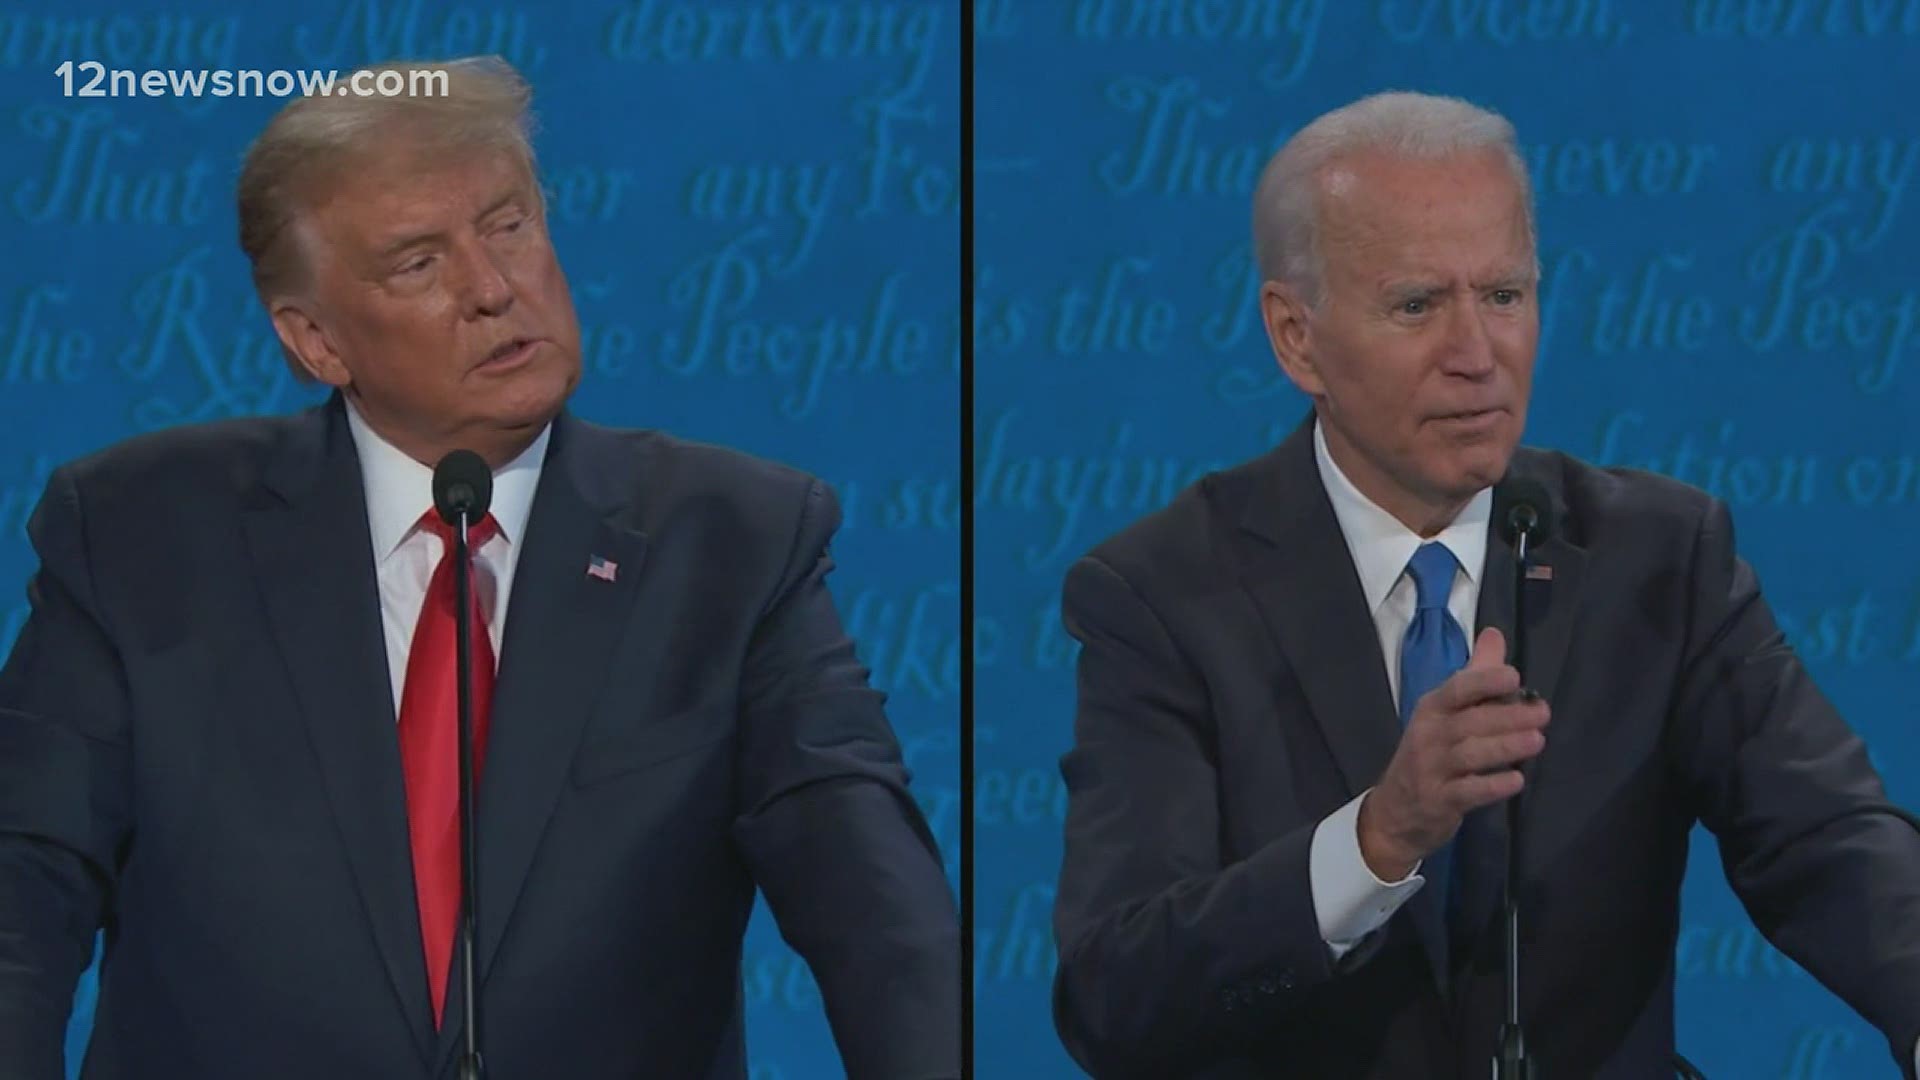 The Biden campaign tried to walk back comments about the oil industry that came at the end of last night's debate.